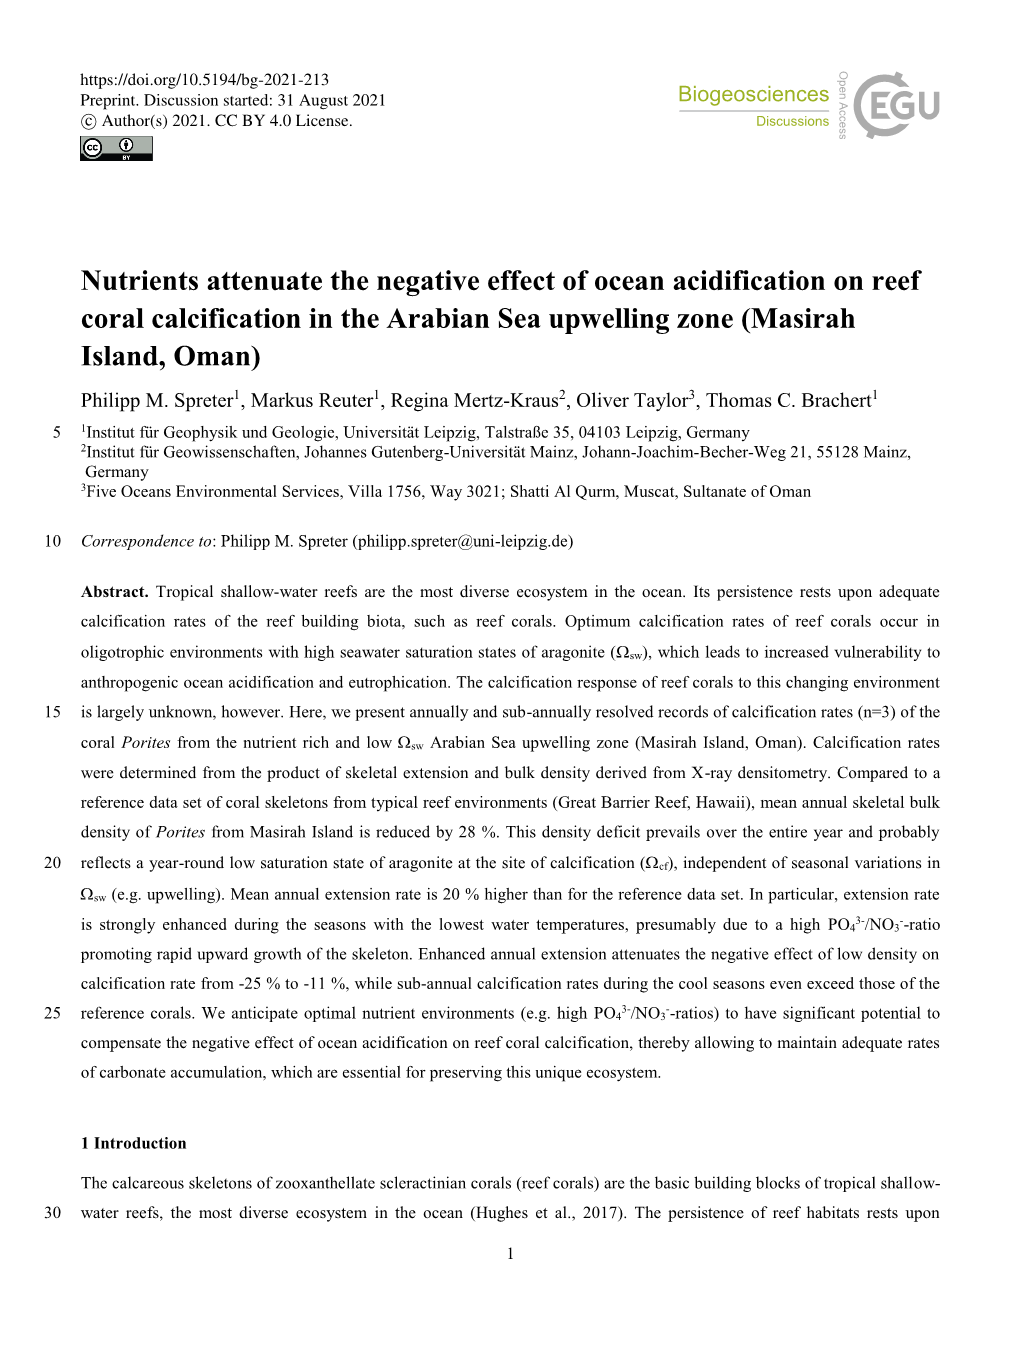 Nutrients Attenuate the Negative Effect of Ocean Acidification on Reef Coral Calcification in the Arabian Sea Upwelling Zone (Masirah Island, Oman) Philipp M